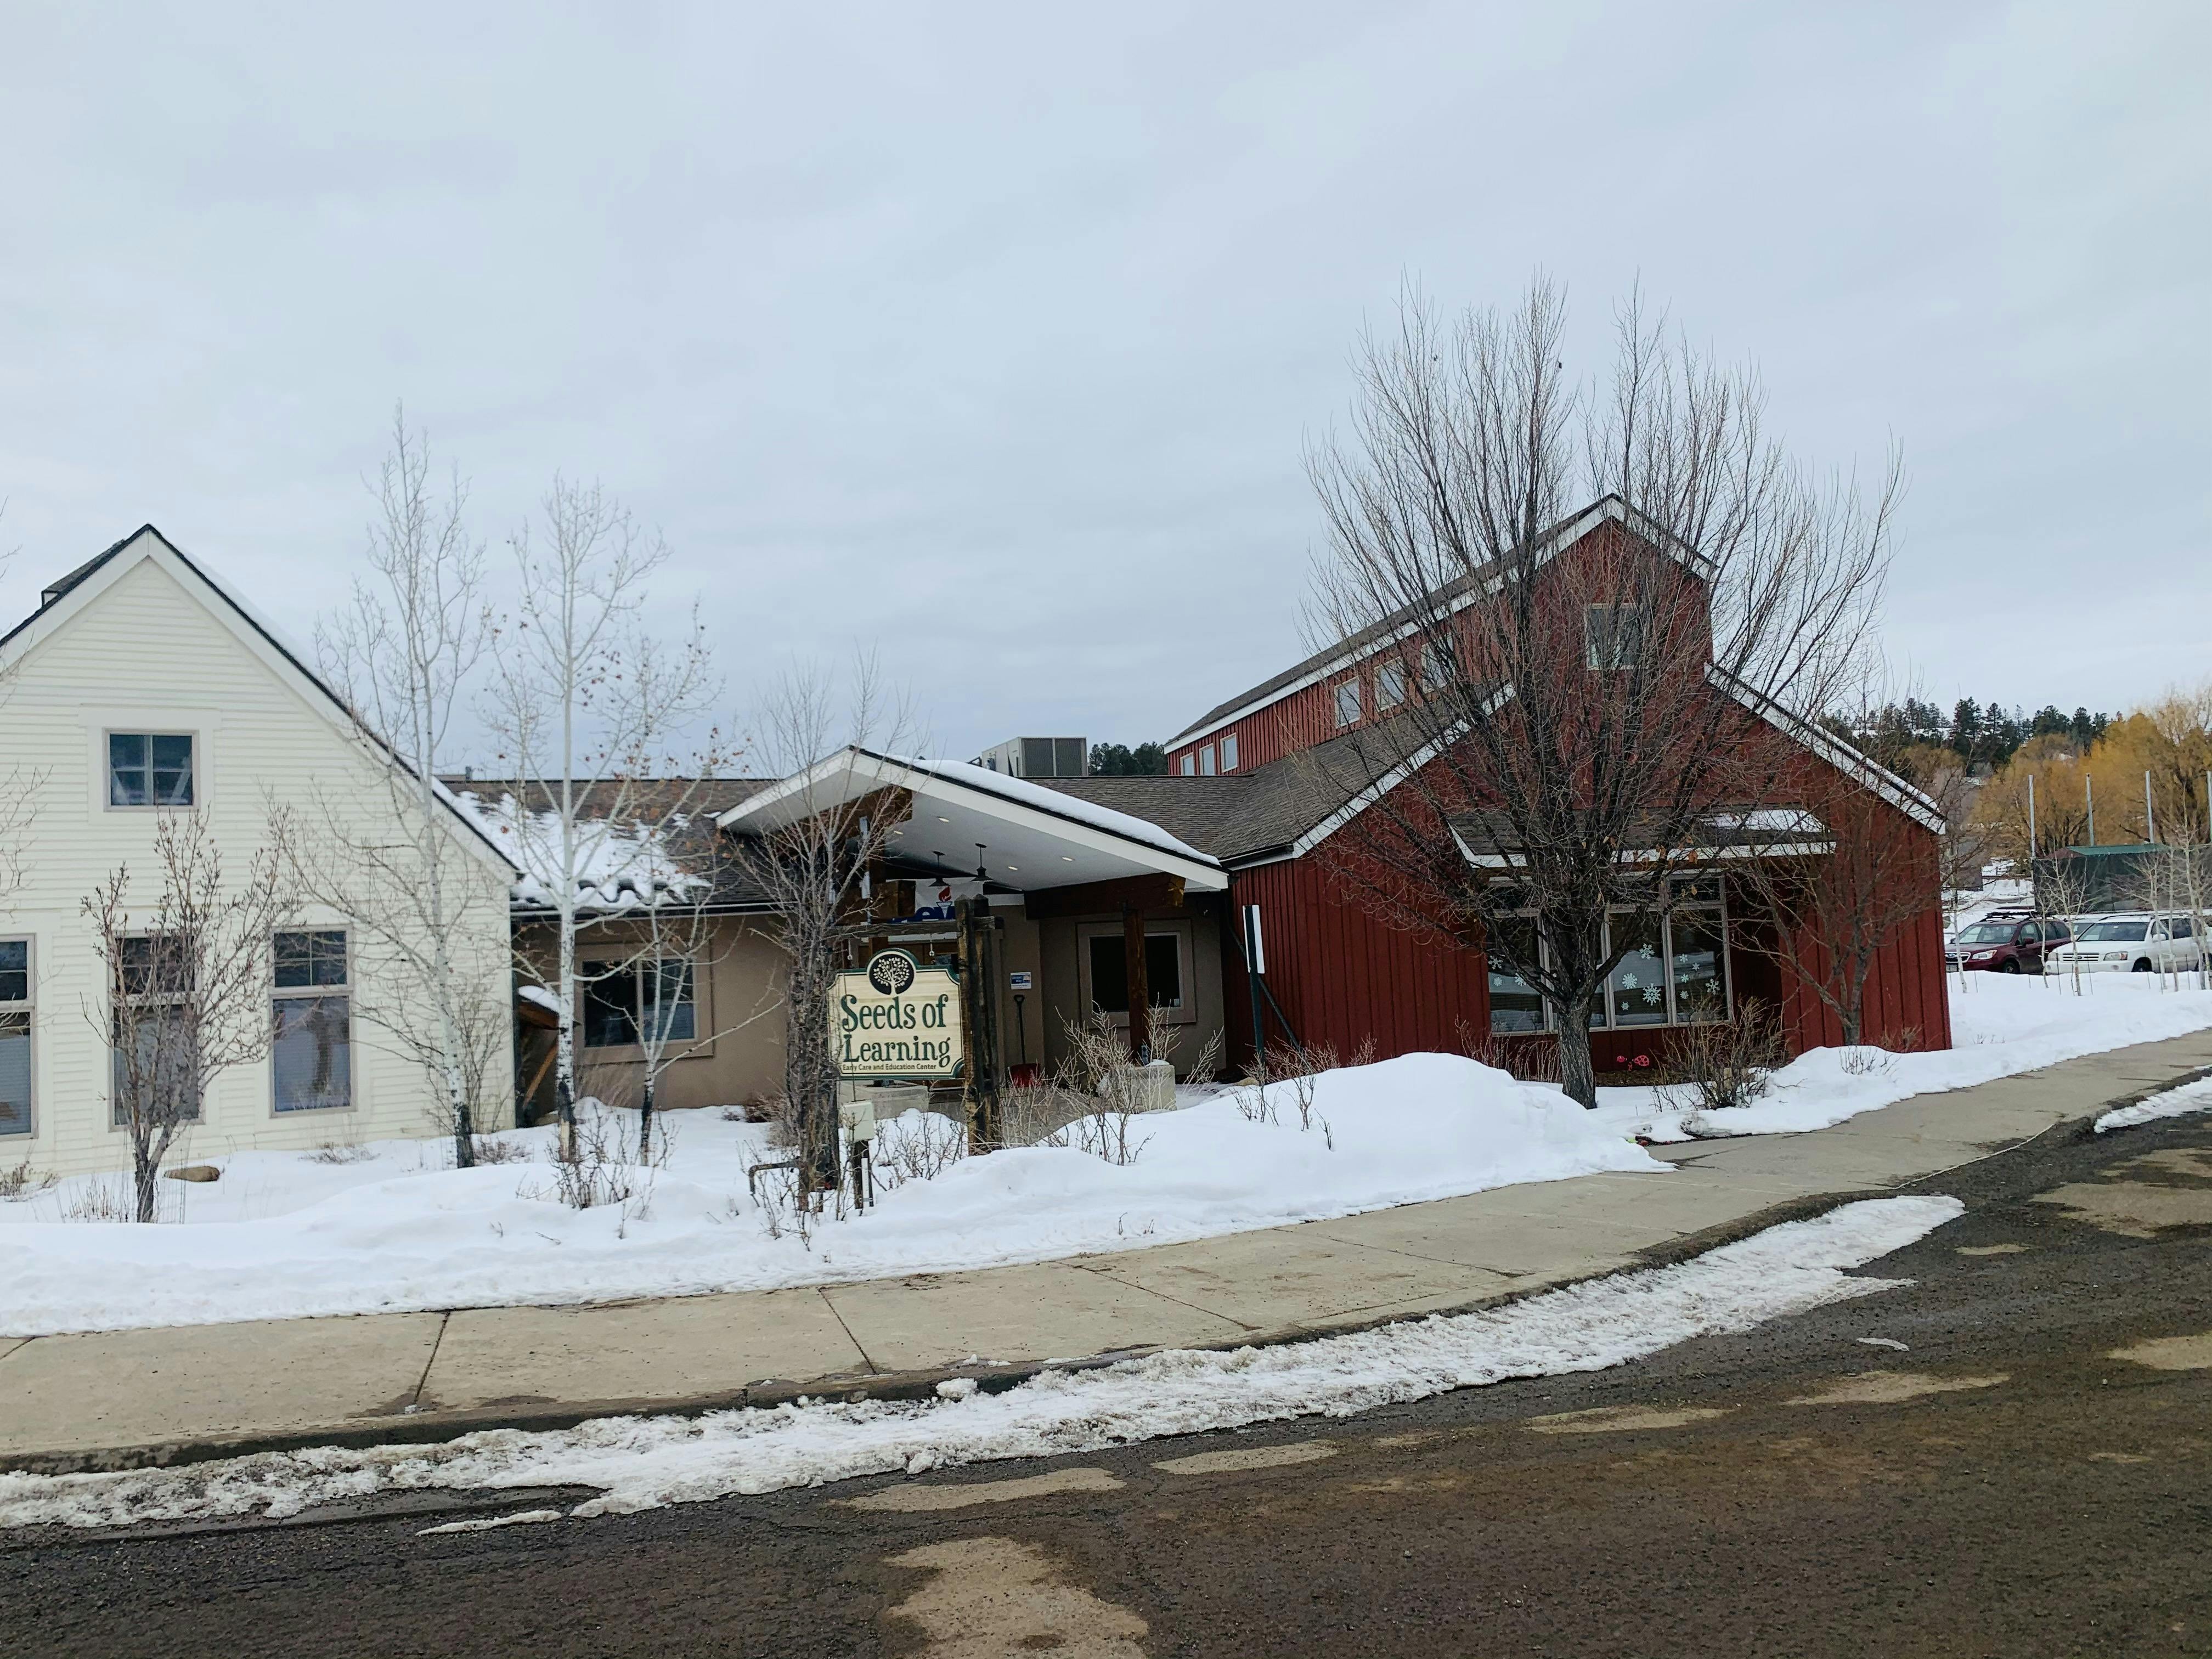 One of two Early Childhood Education Centers in Pagosa Springs